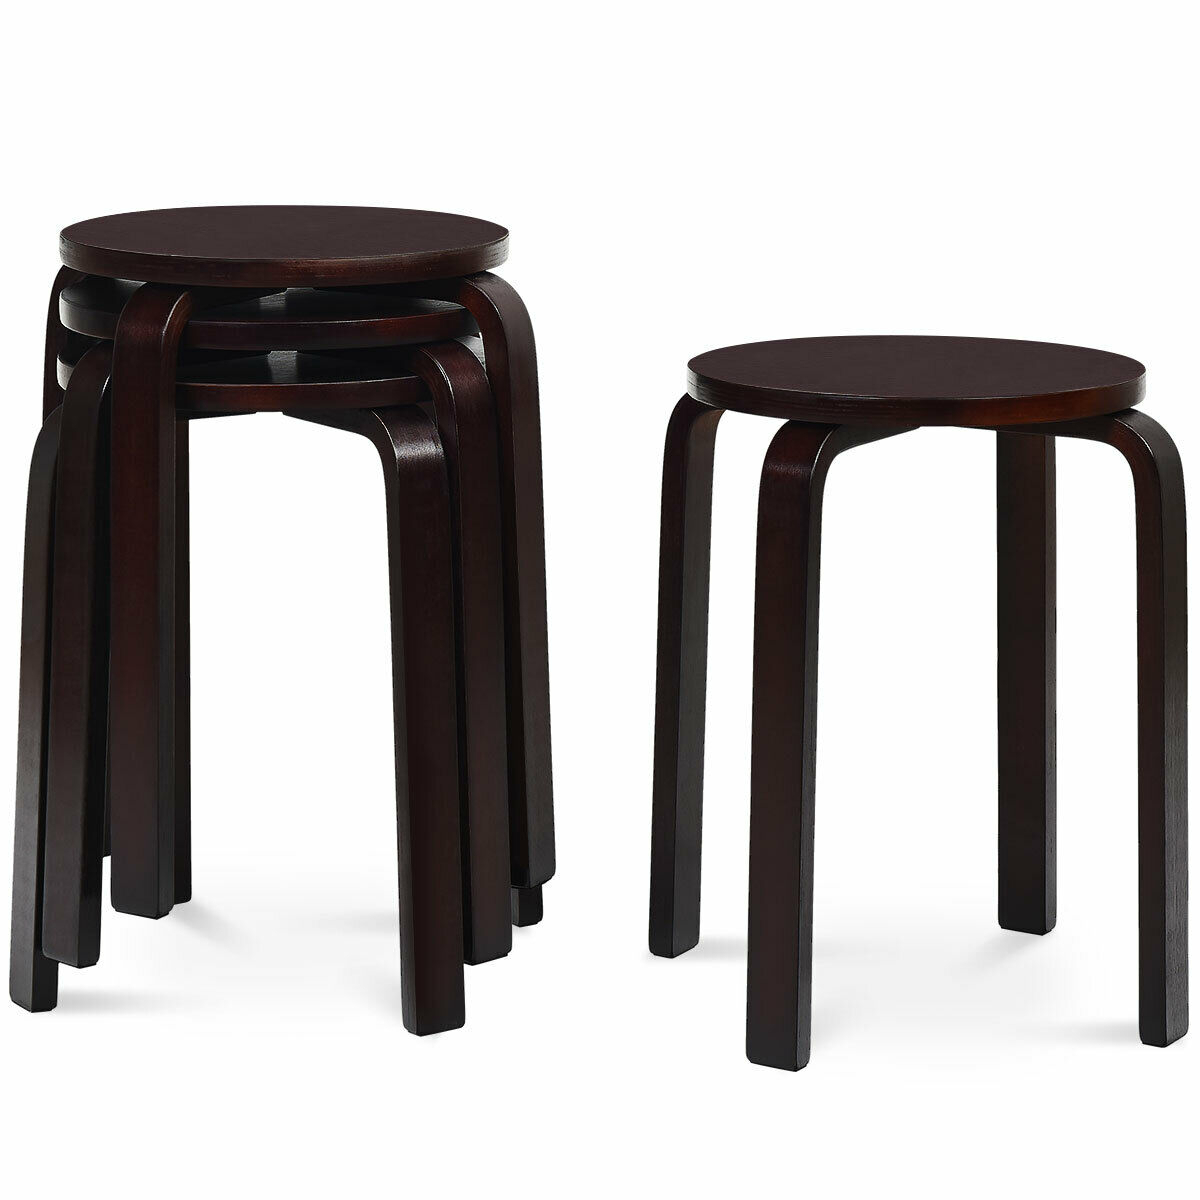 Set Of 4 18 Stacking Stool Round Dining Chair Backless Wood Home Decor Brown